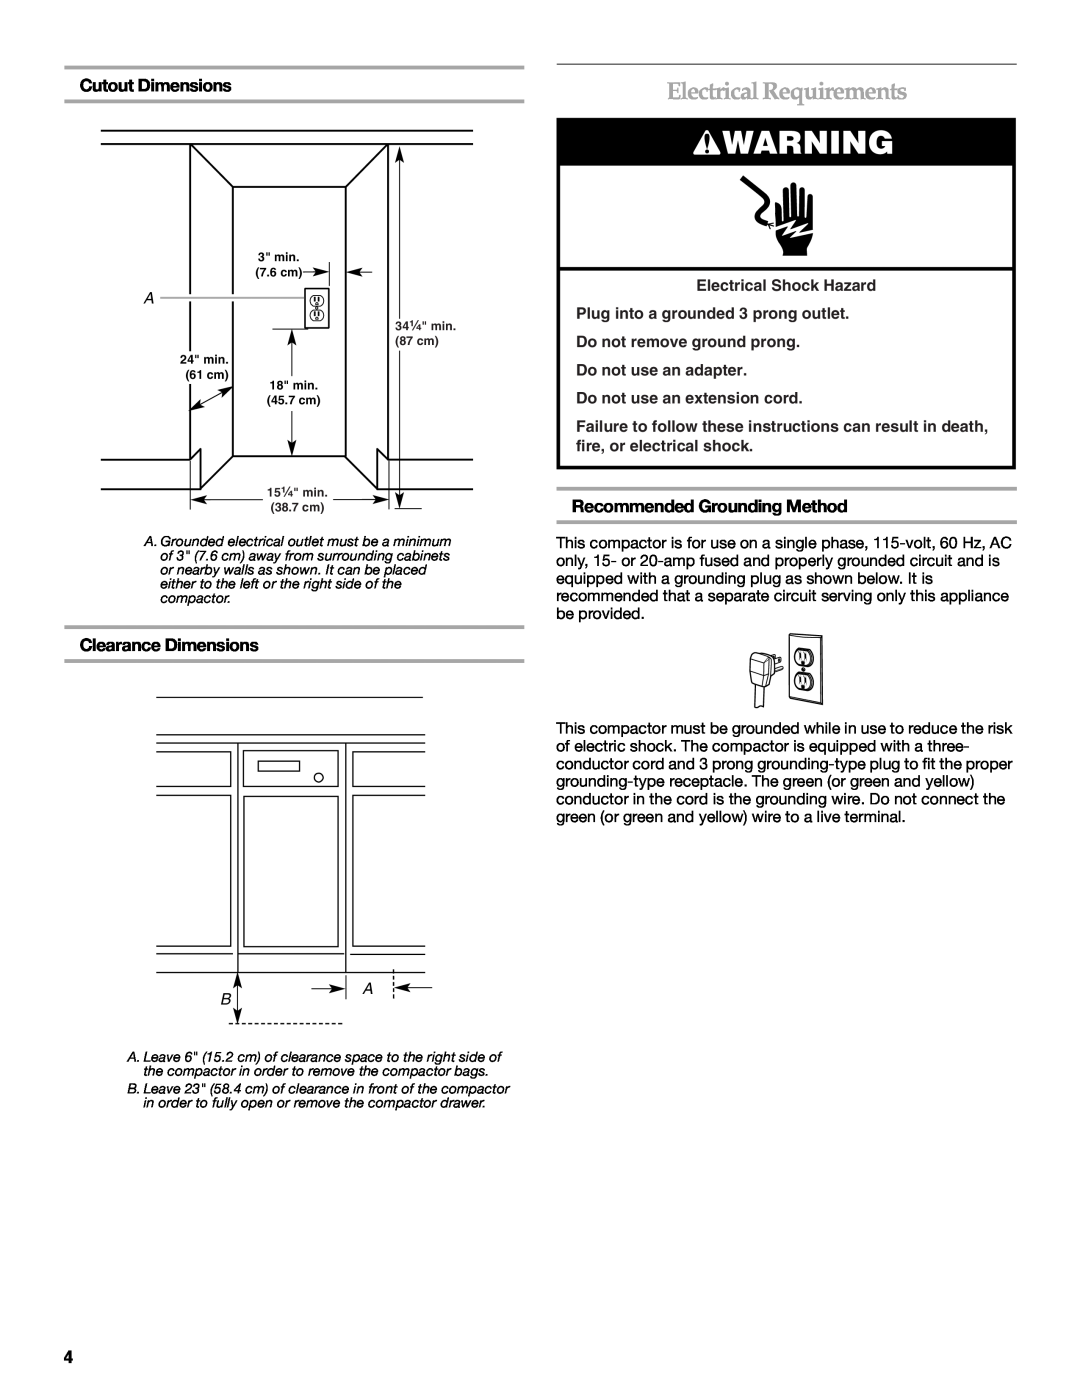 KitchenAid W10242569A manual Electrical Requirements, Cutout Dimensions, Clearance Dimensions, Recommended Grounding Method 